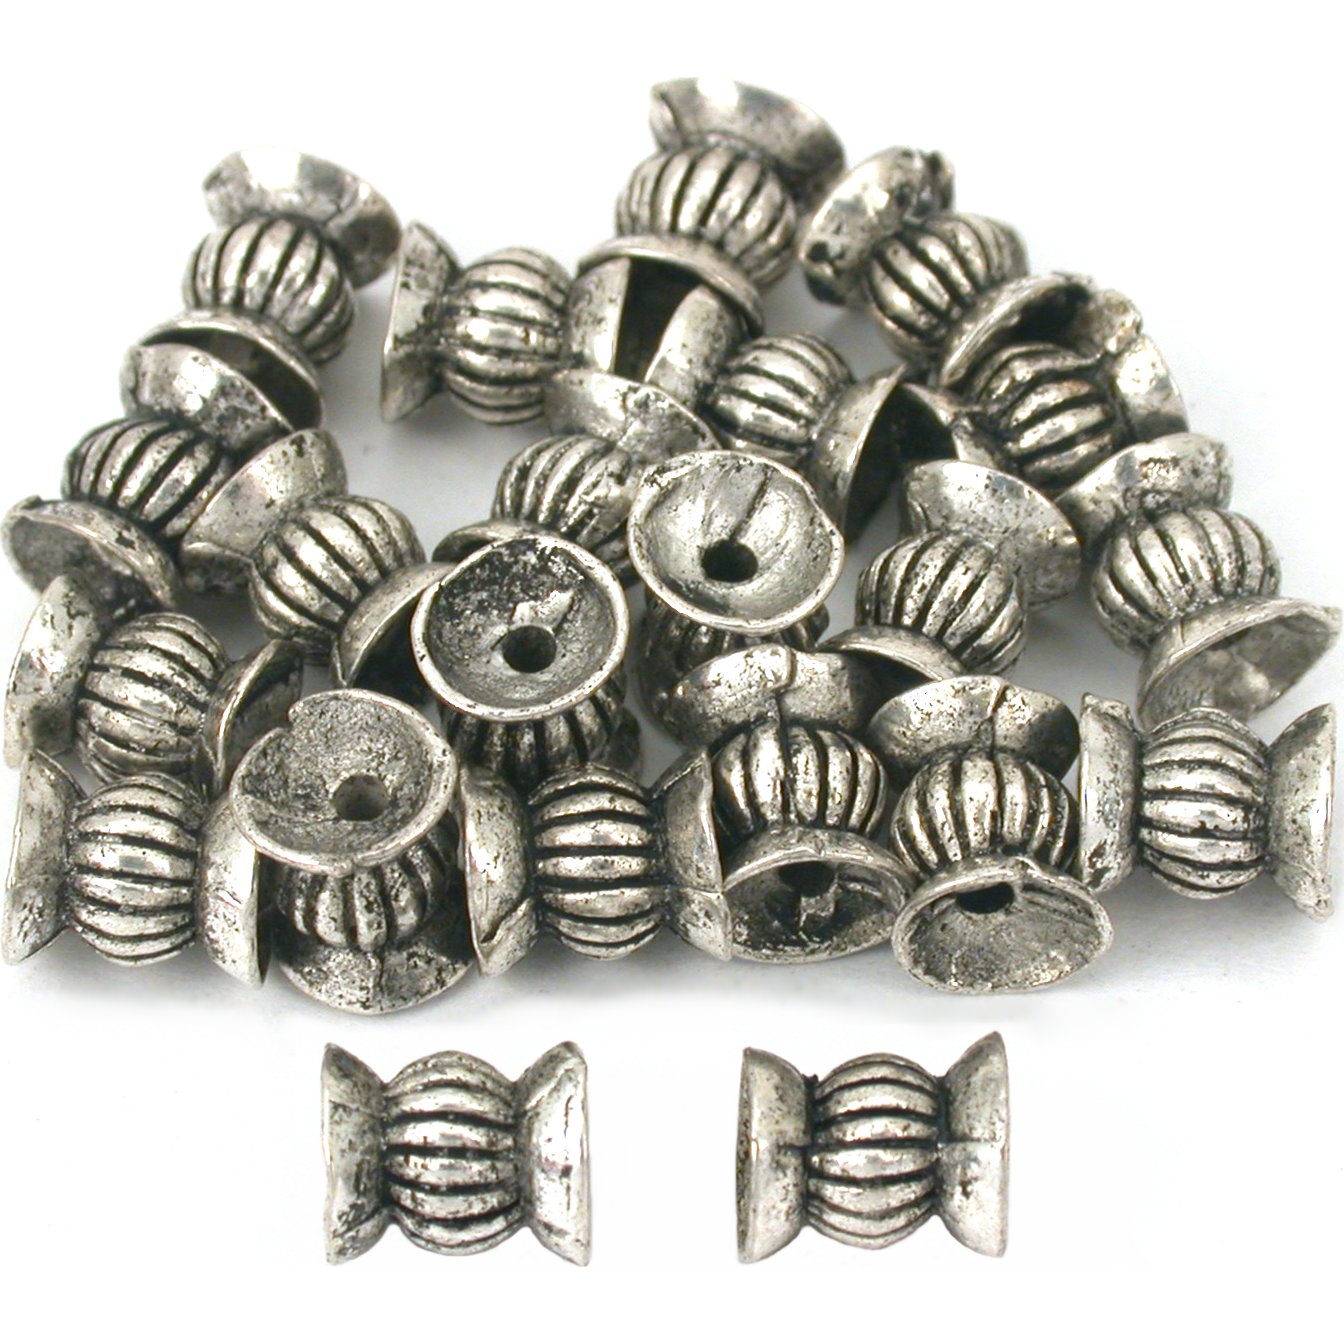 Bali Fluted Tube Beads Antique Silver Plated 7.5mm 20Pcs Approx.